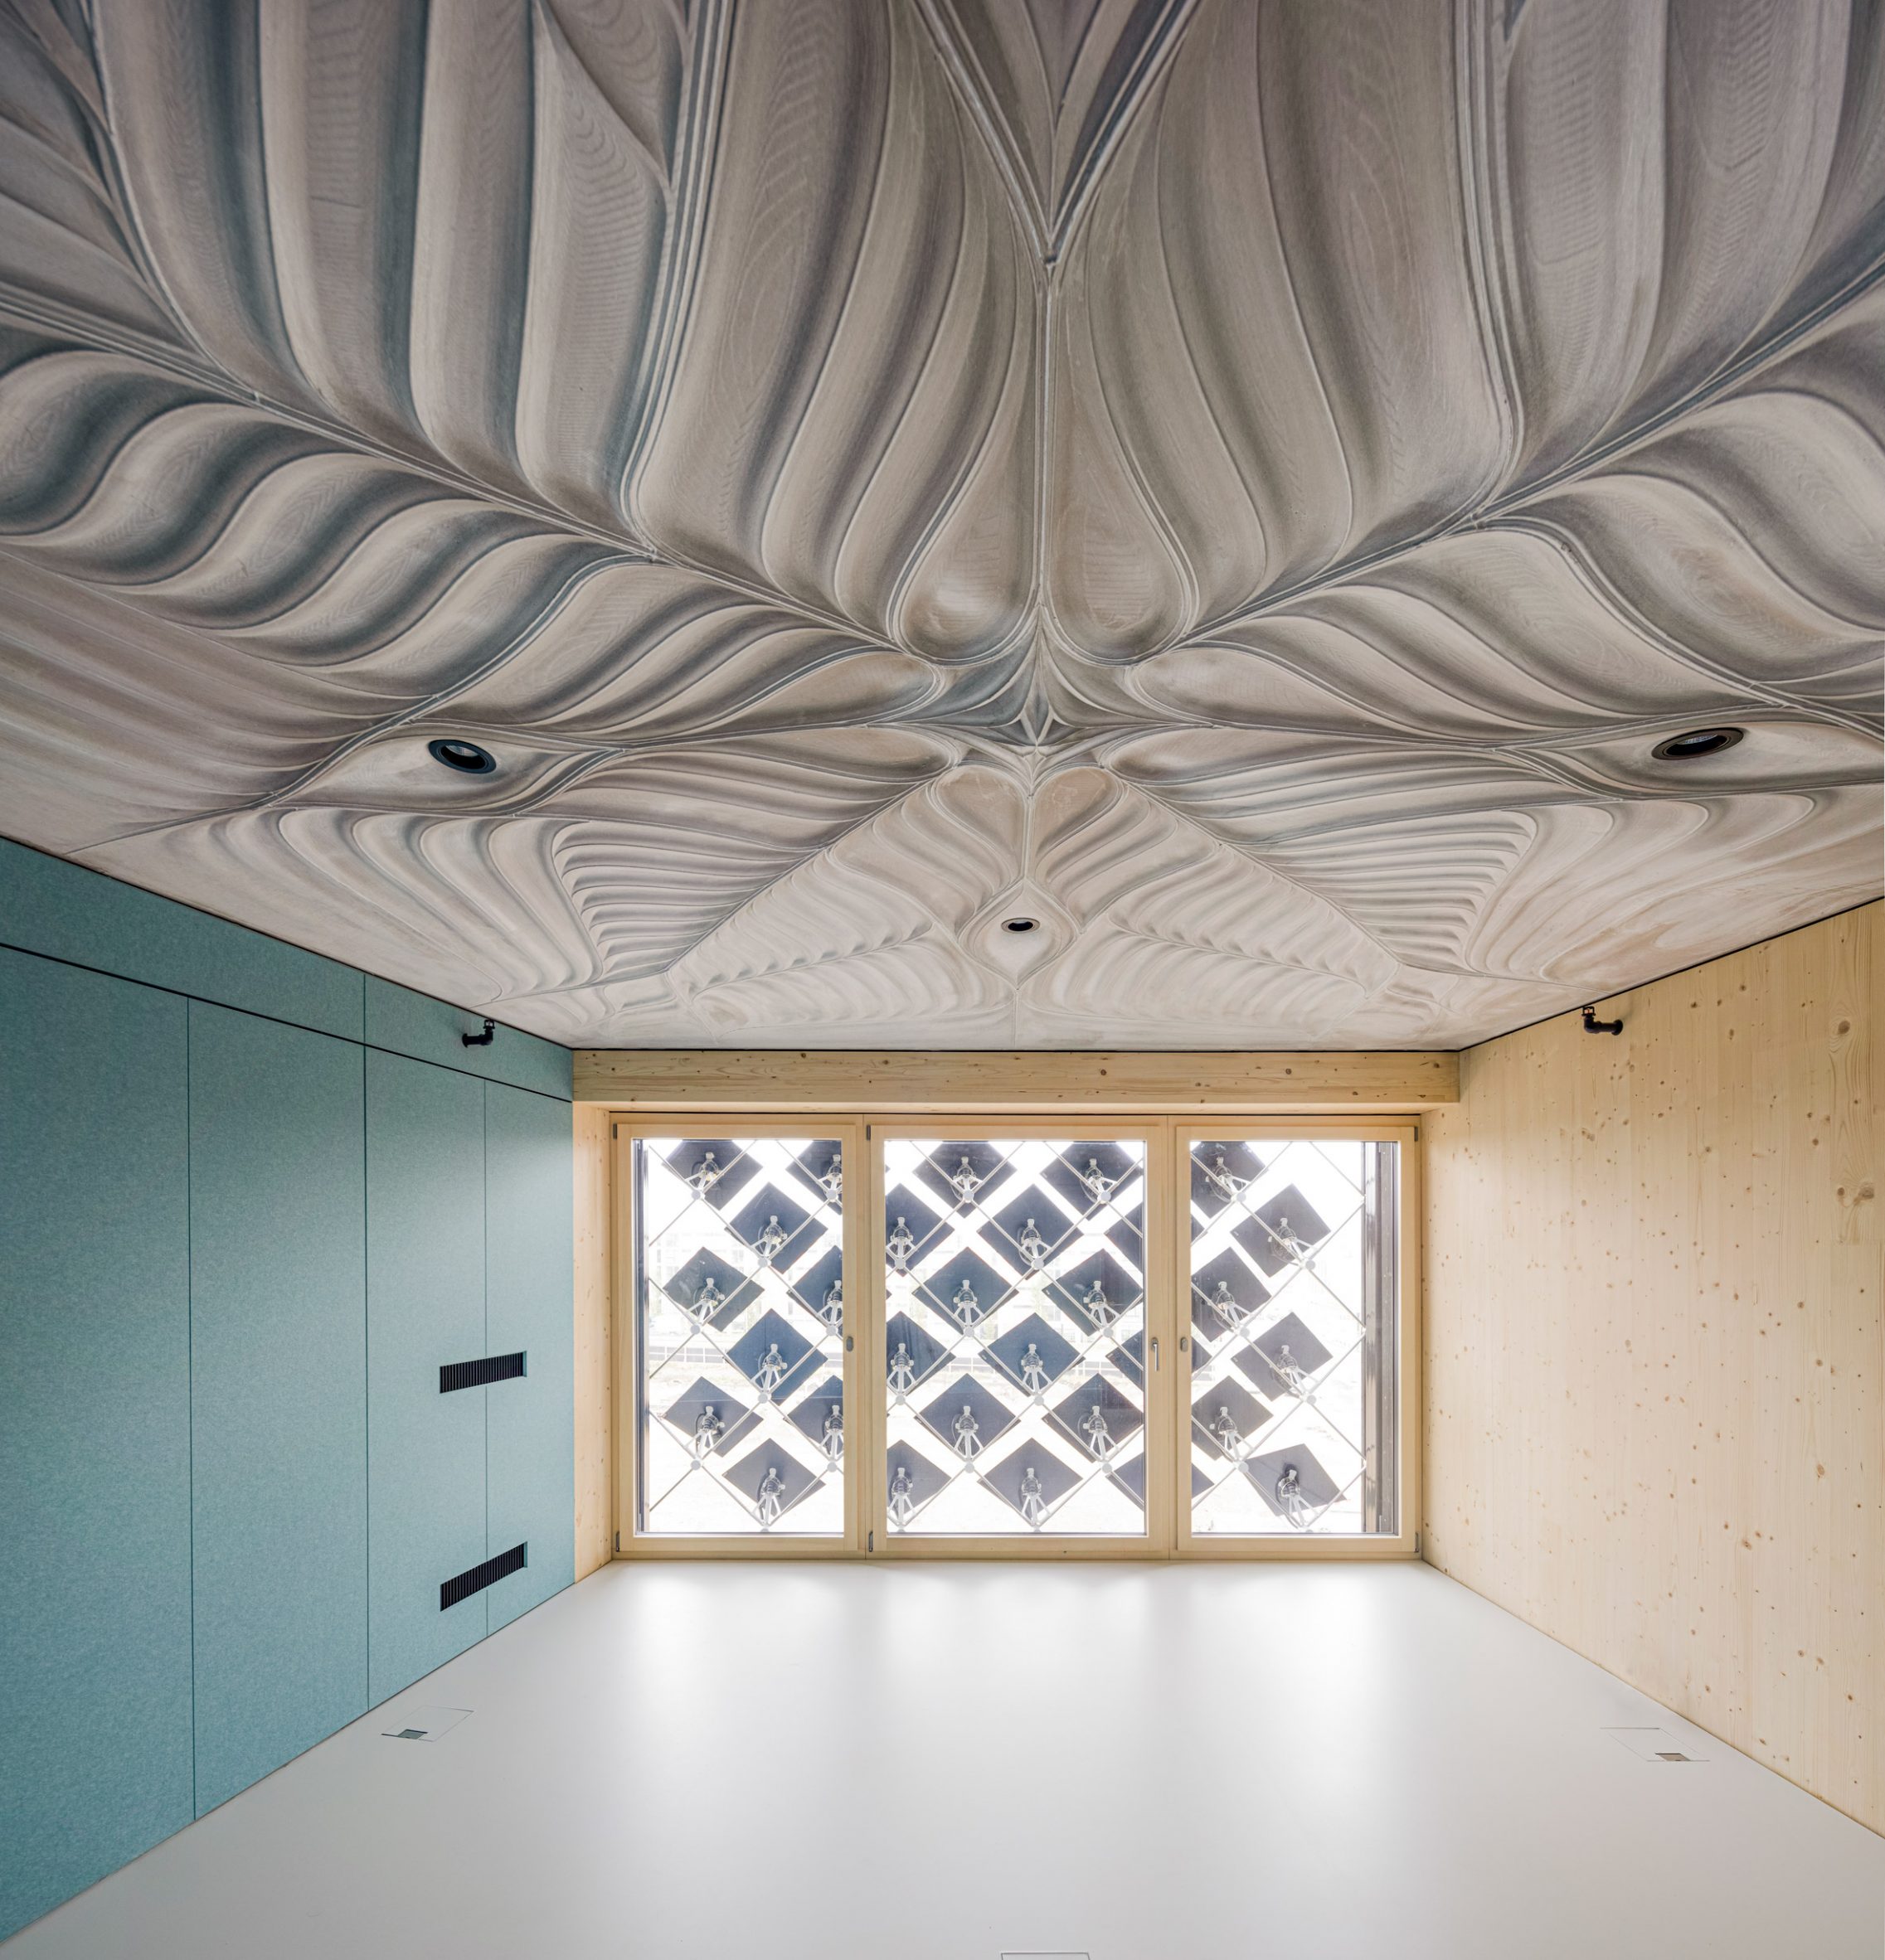 HiRes Concrete Slab ceiling above an office in the NEST building